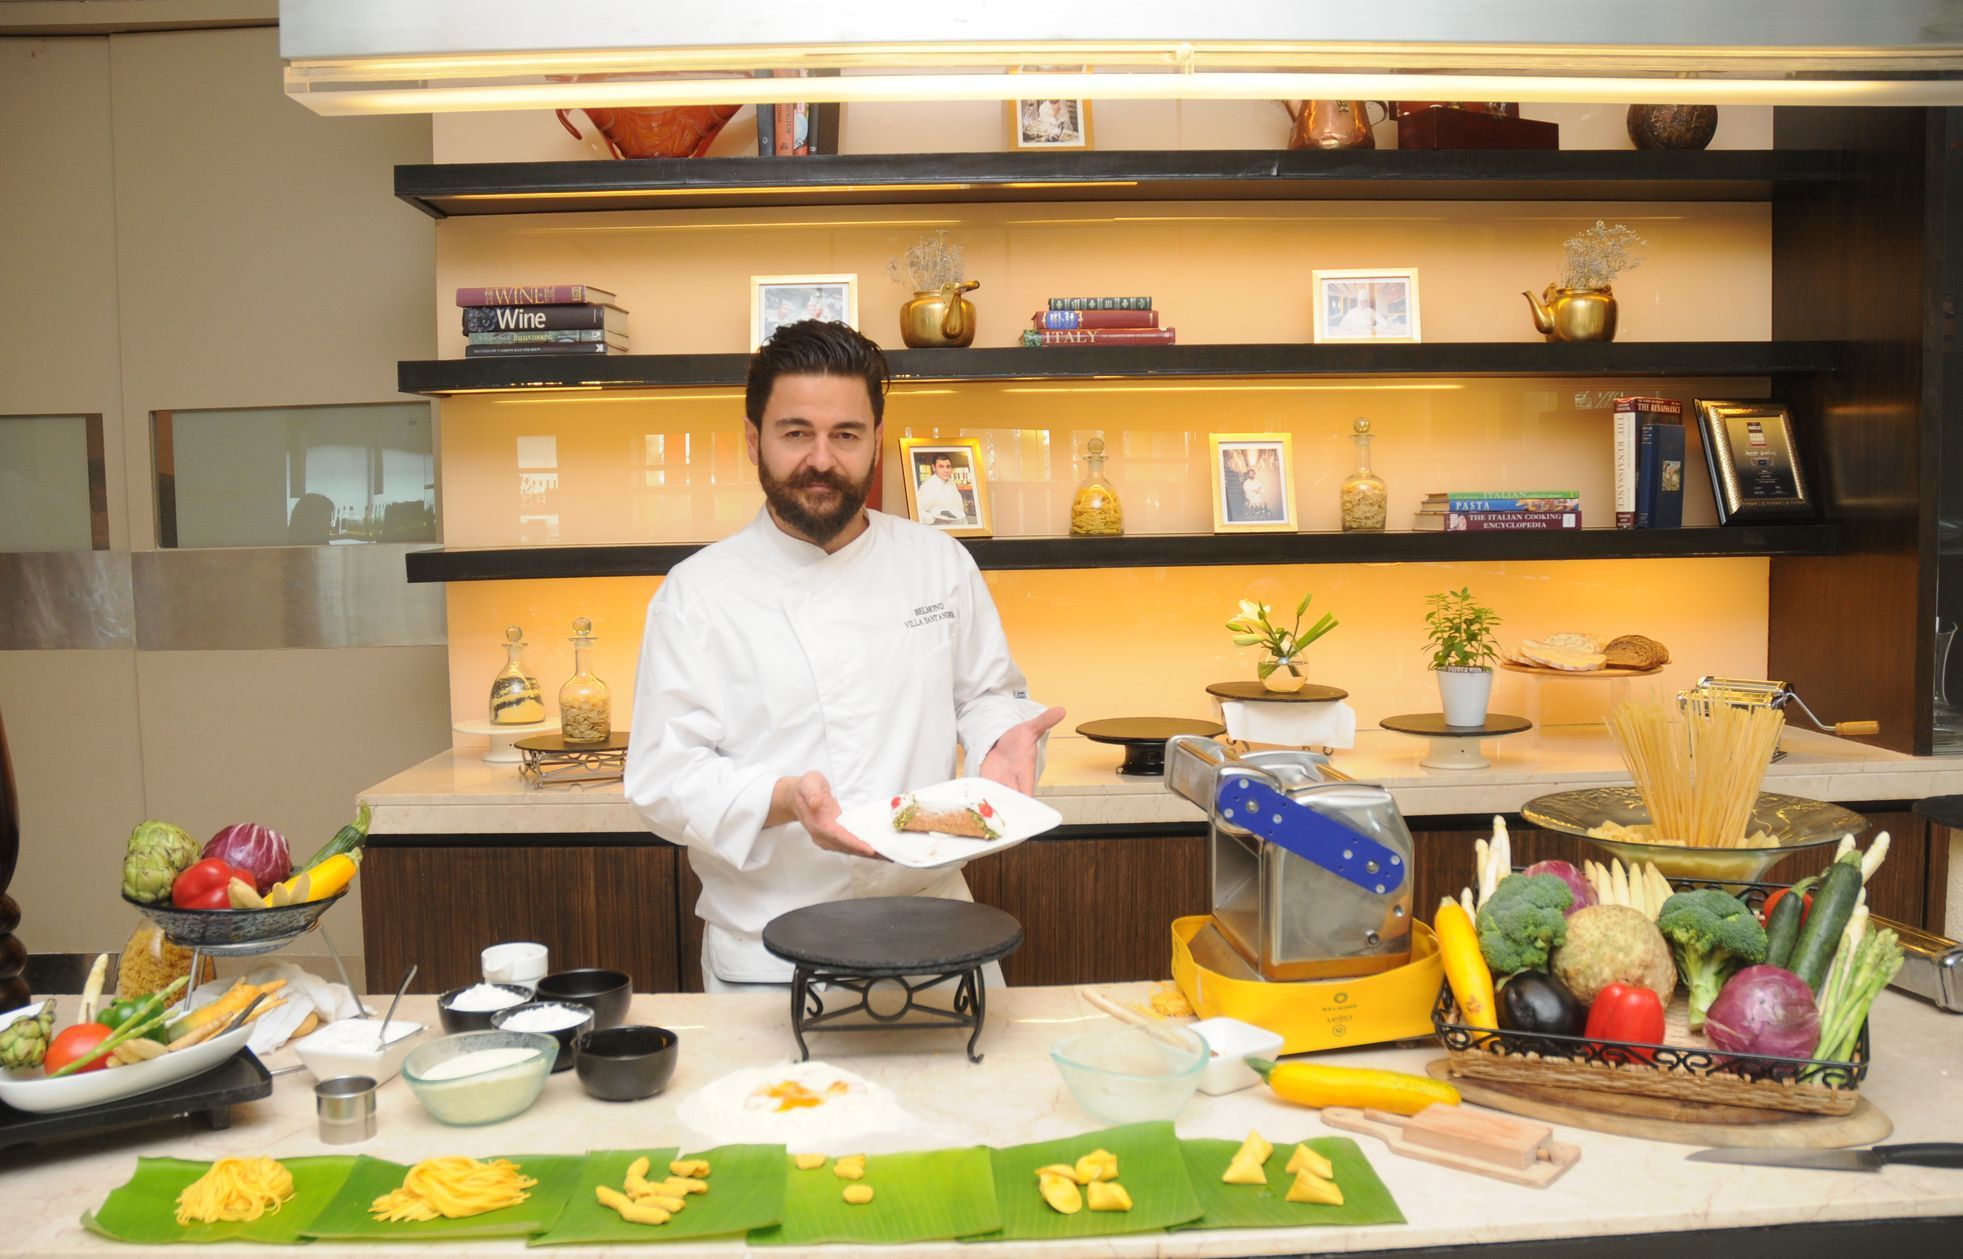 How to eat pasta & why Indians love Italian: An interview with renowned chef Agostino D’Angelo